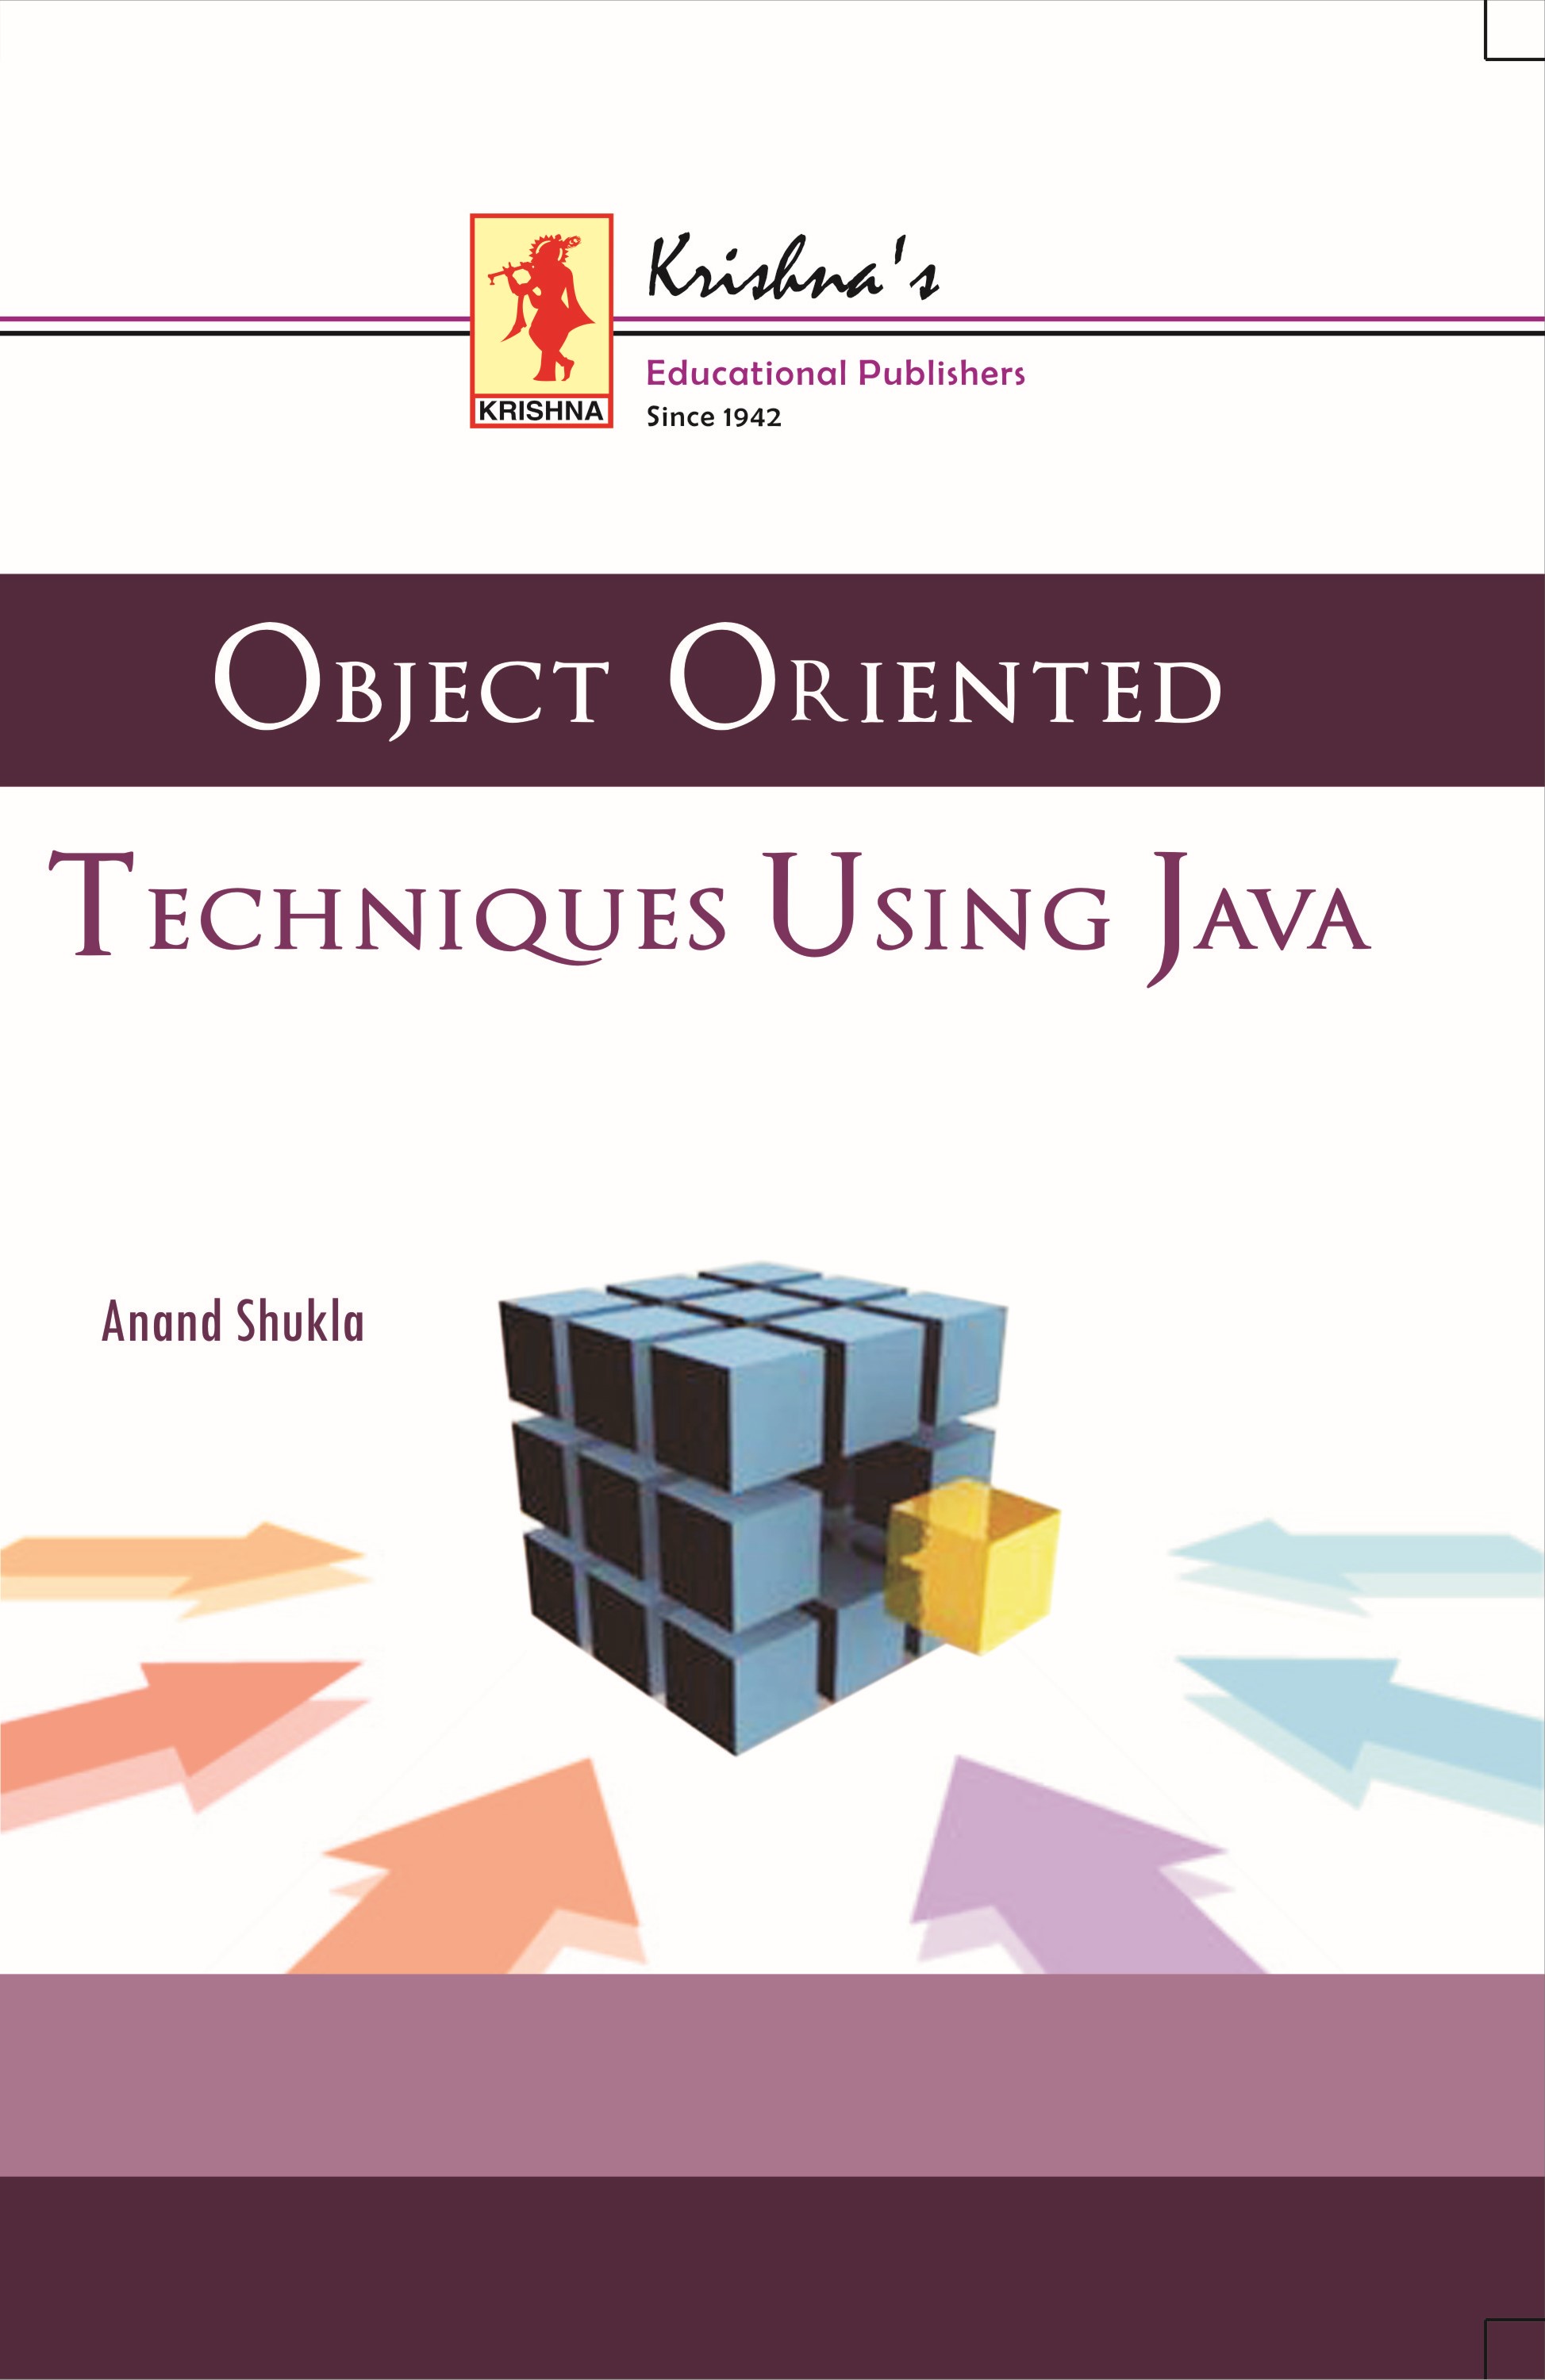 Object Oriented Tehcniques Using Java (English) Code 600-01